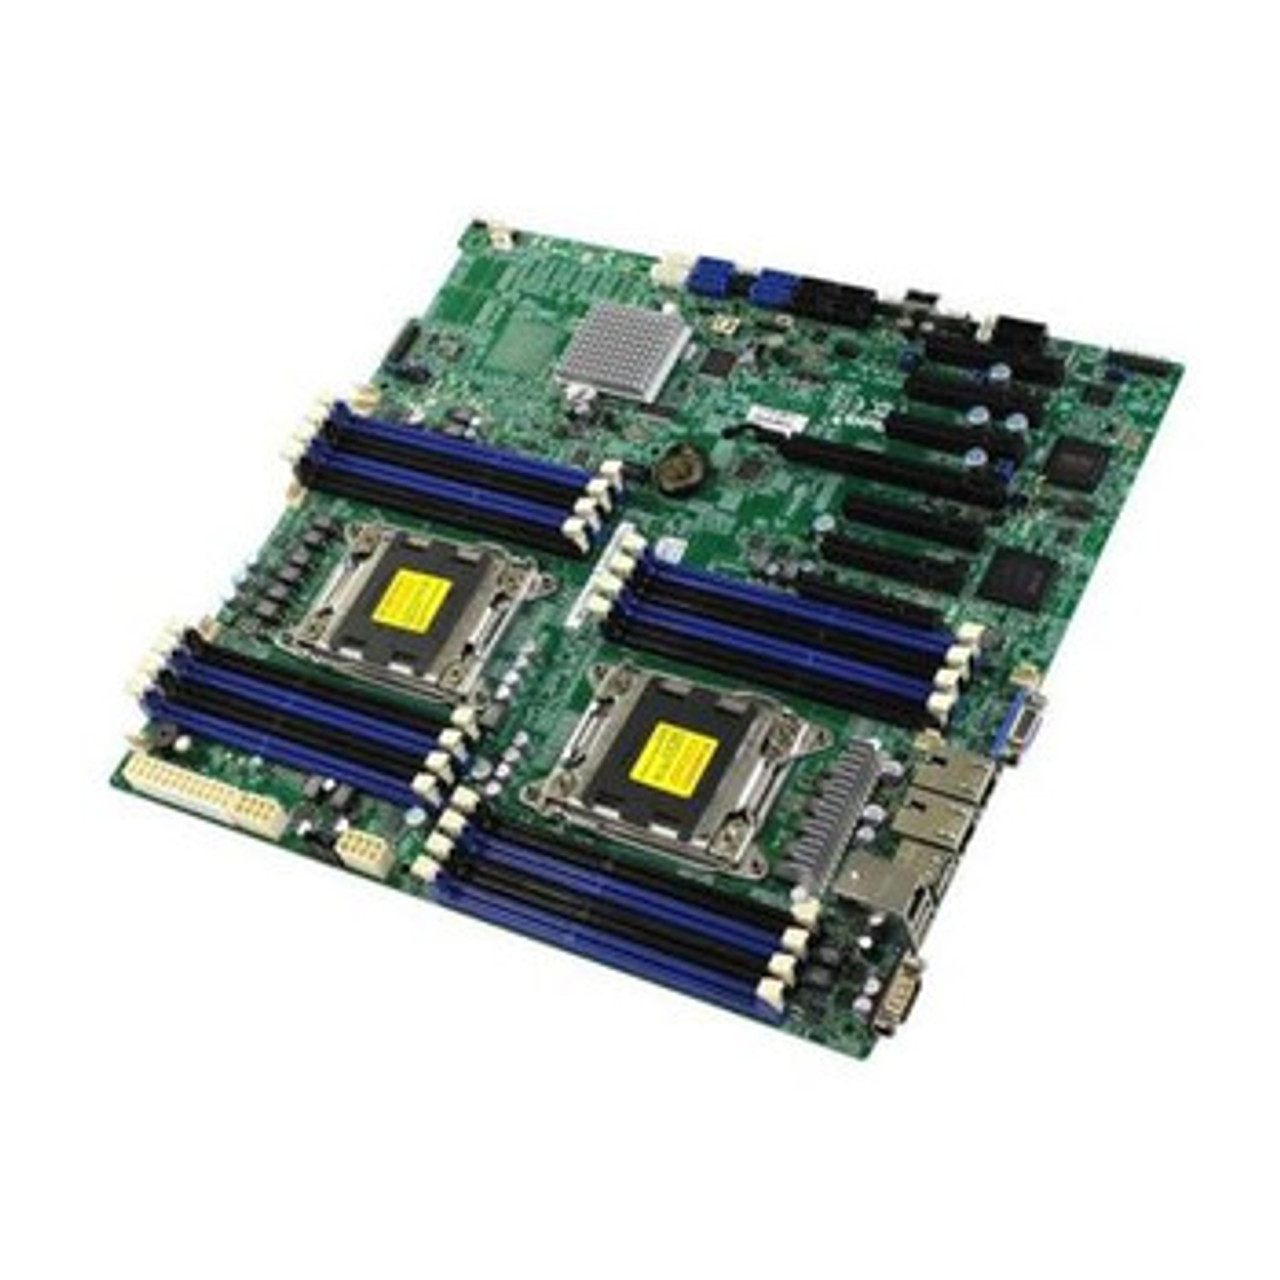 X9DRH-IF | Supermicro | Intel C602 Chipset Xeon E5-2600 Processor Support Dual Socket R Lga2011 Extended-Atx Motherboard